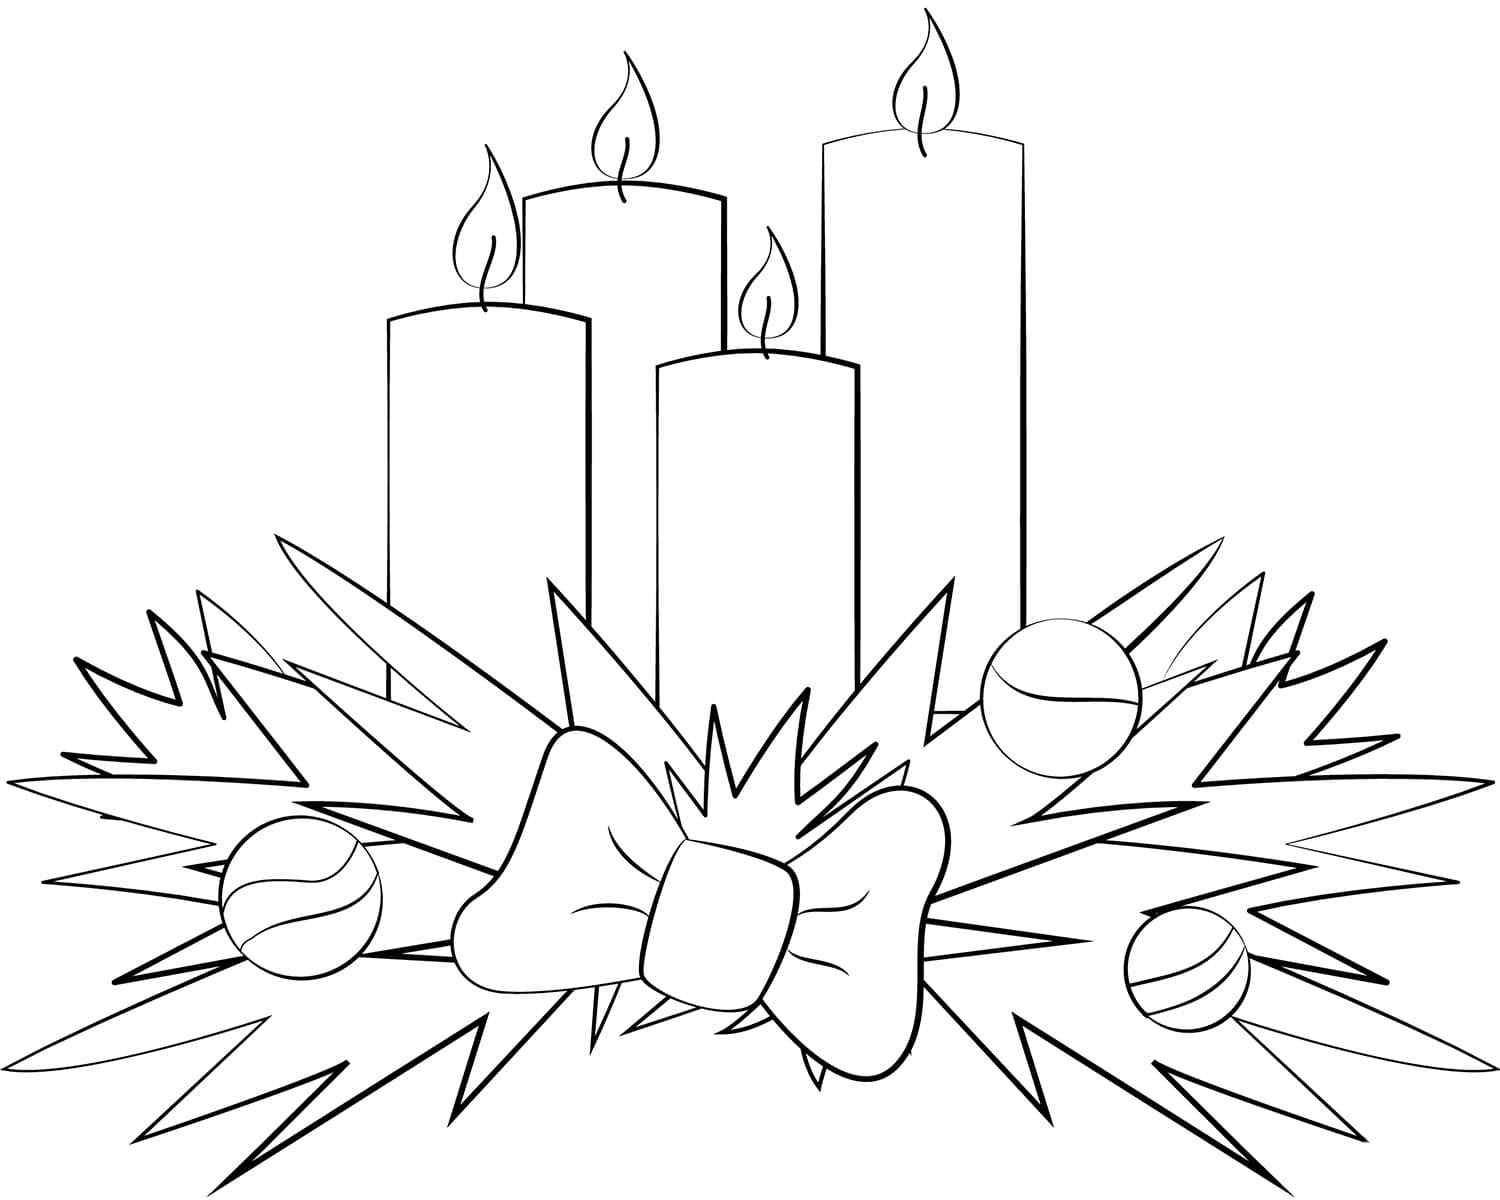 Bright Candles Are Kind Coloring Page